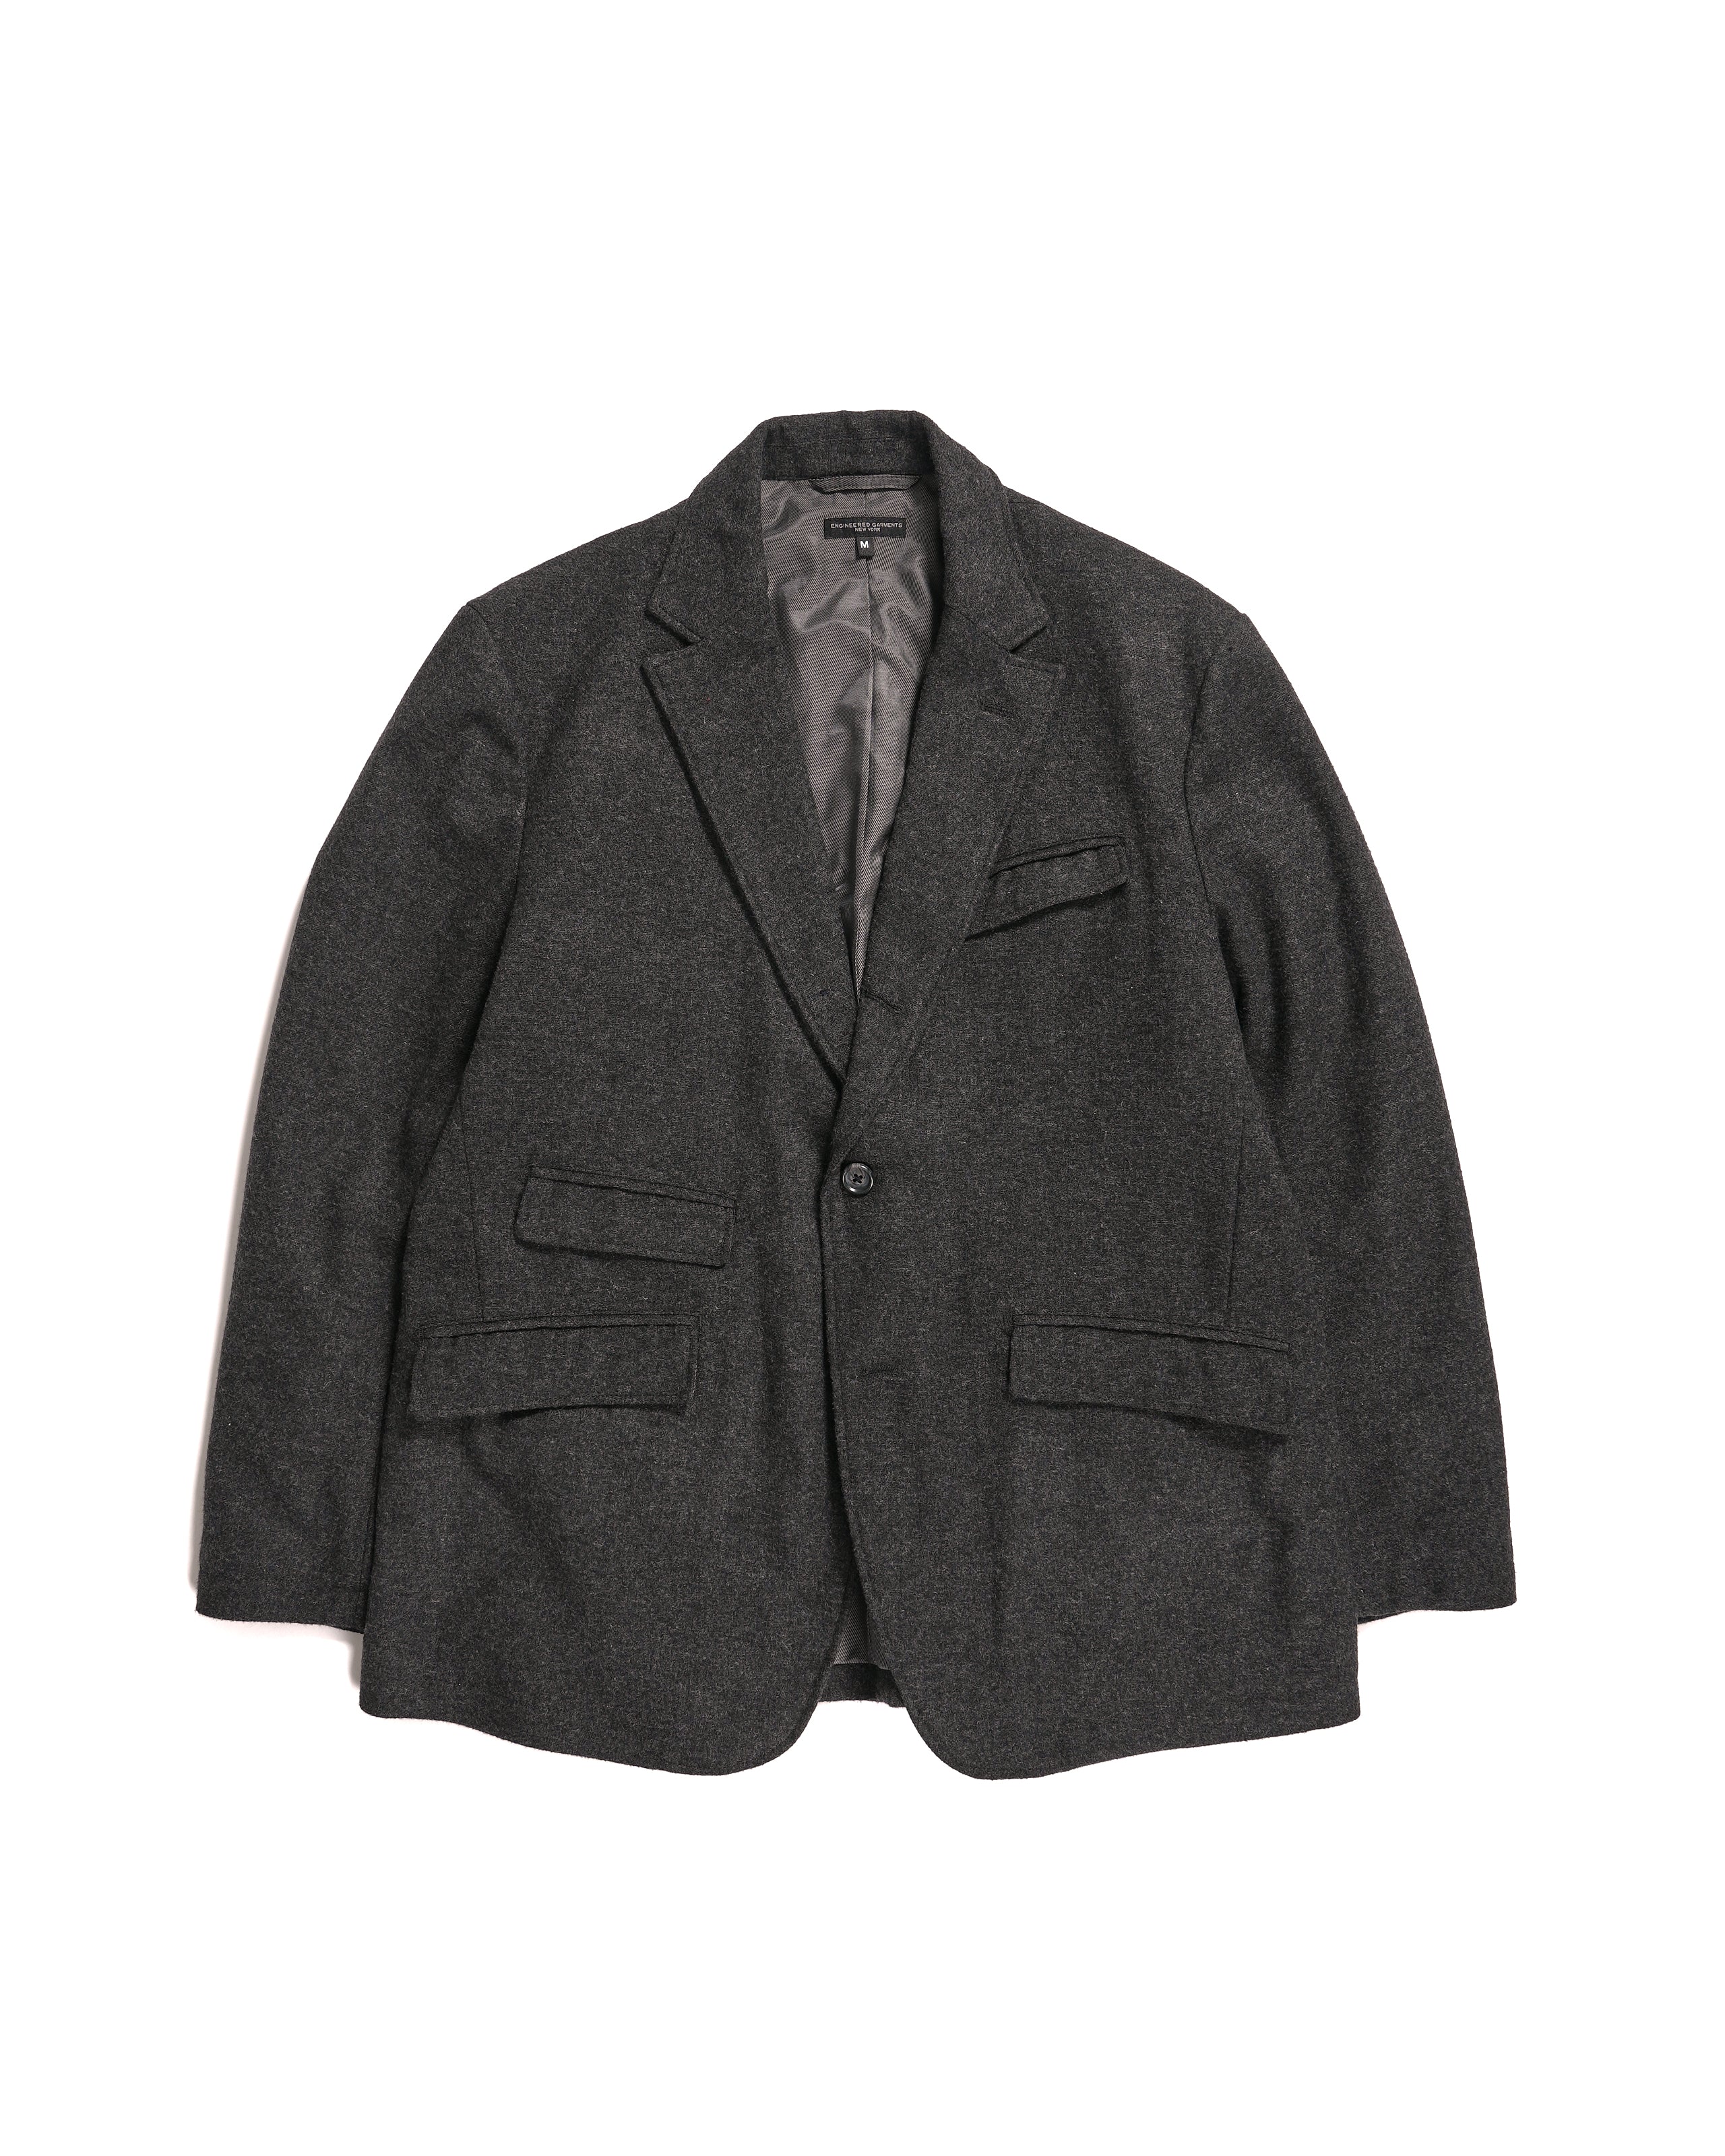 Andover Jacket - Grey Solid Poly Wool Flannel